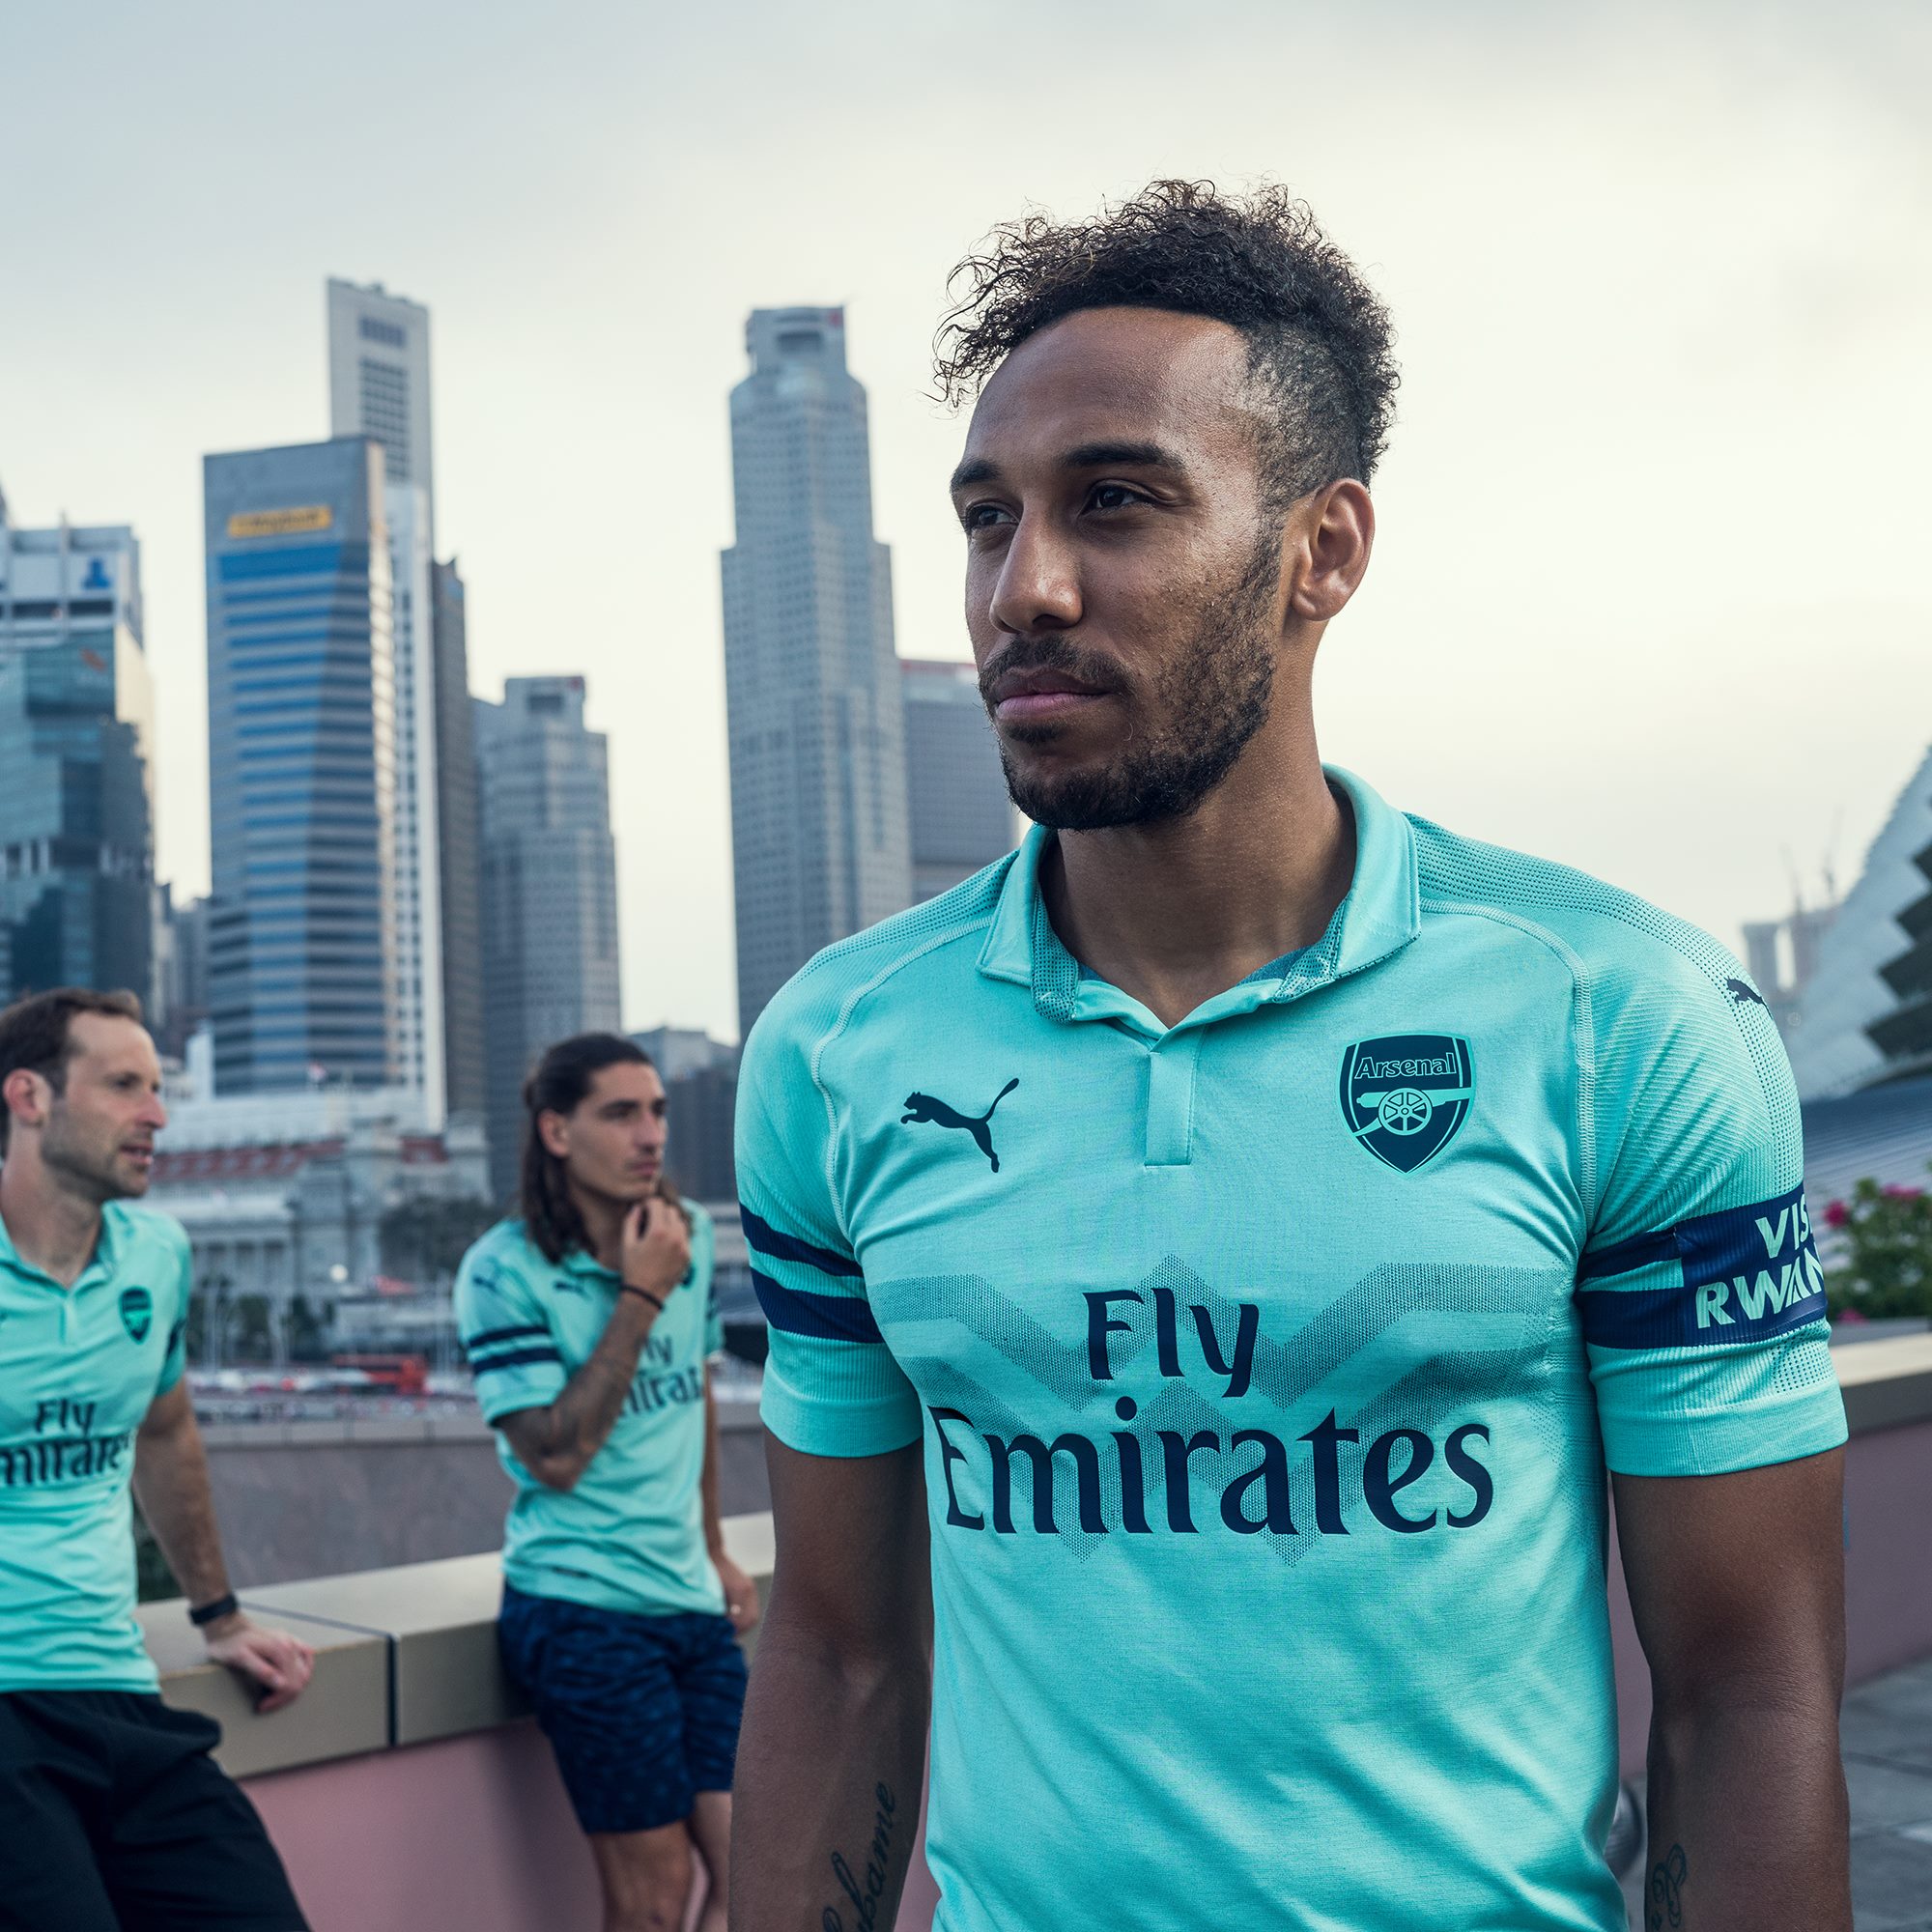 maglie arsenal 2018 2019